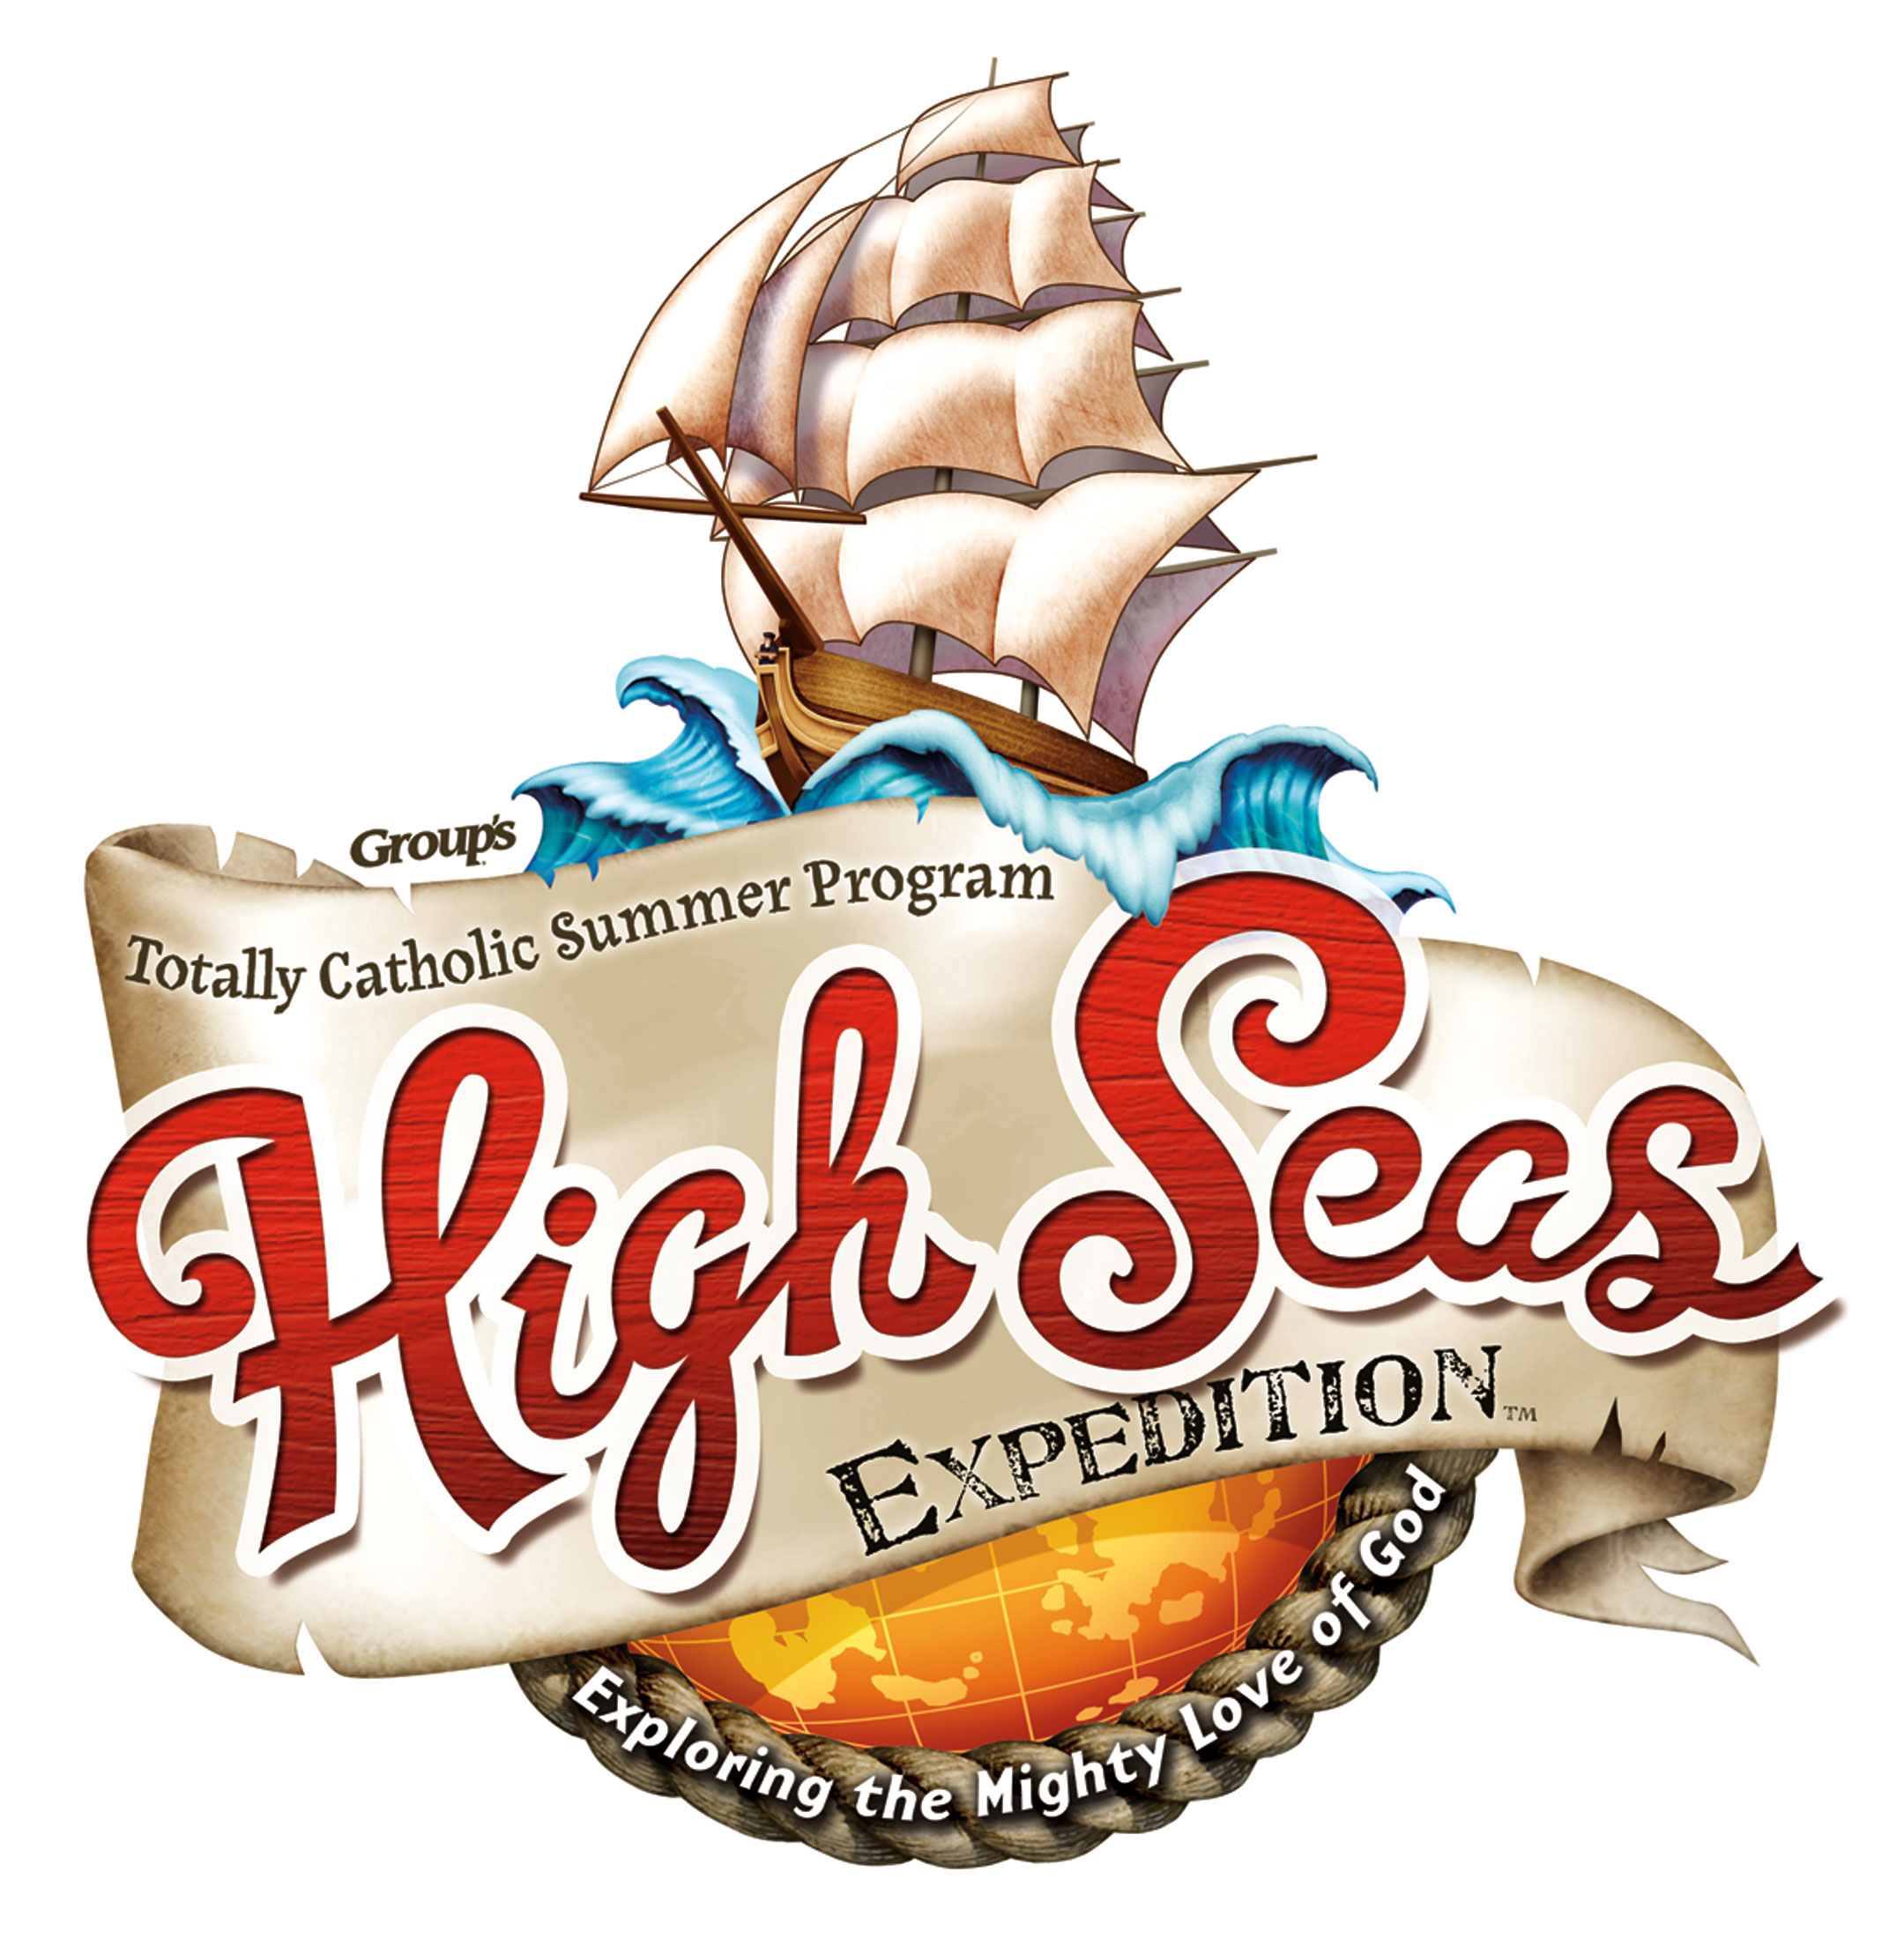 Expedition Clipart Highseaslogolarge4clargelowres Jpg